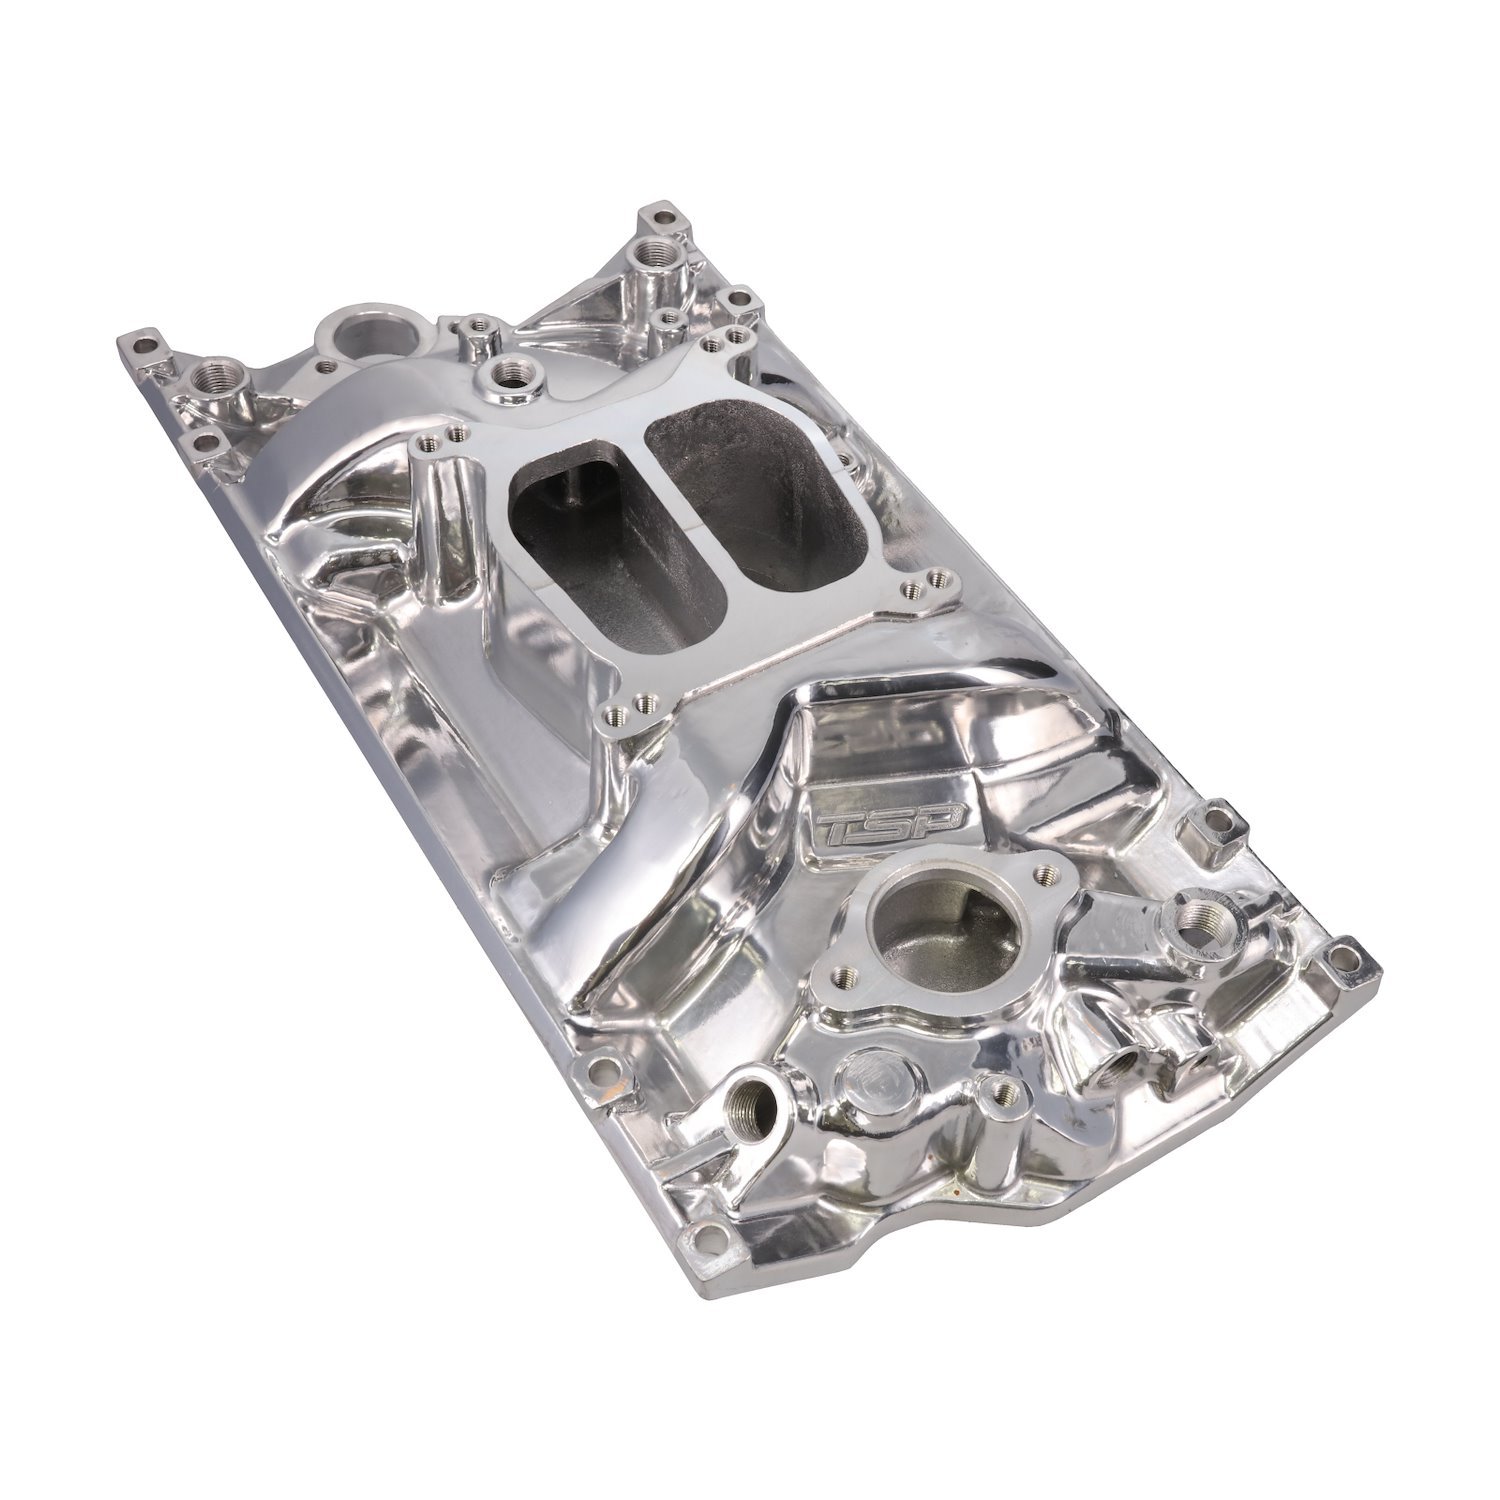 82006 Intake Manifold, Chevy Small Block Carb. Aluminum Dual Plane, Polished